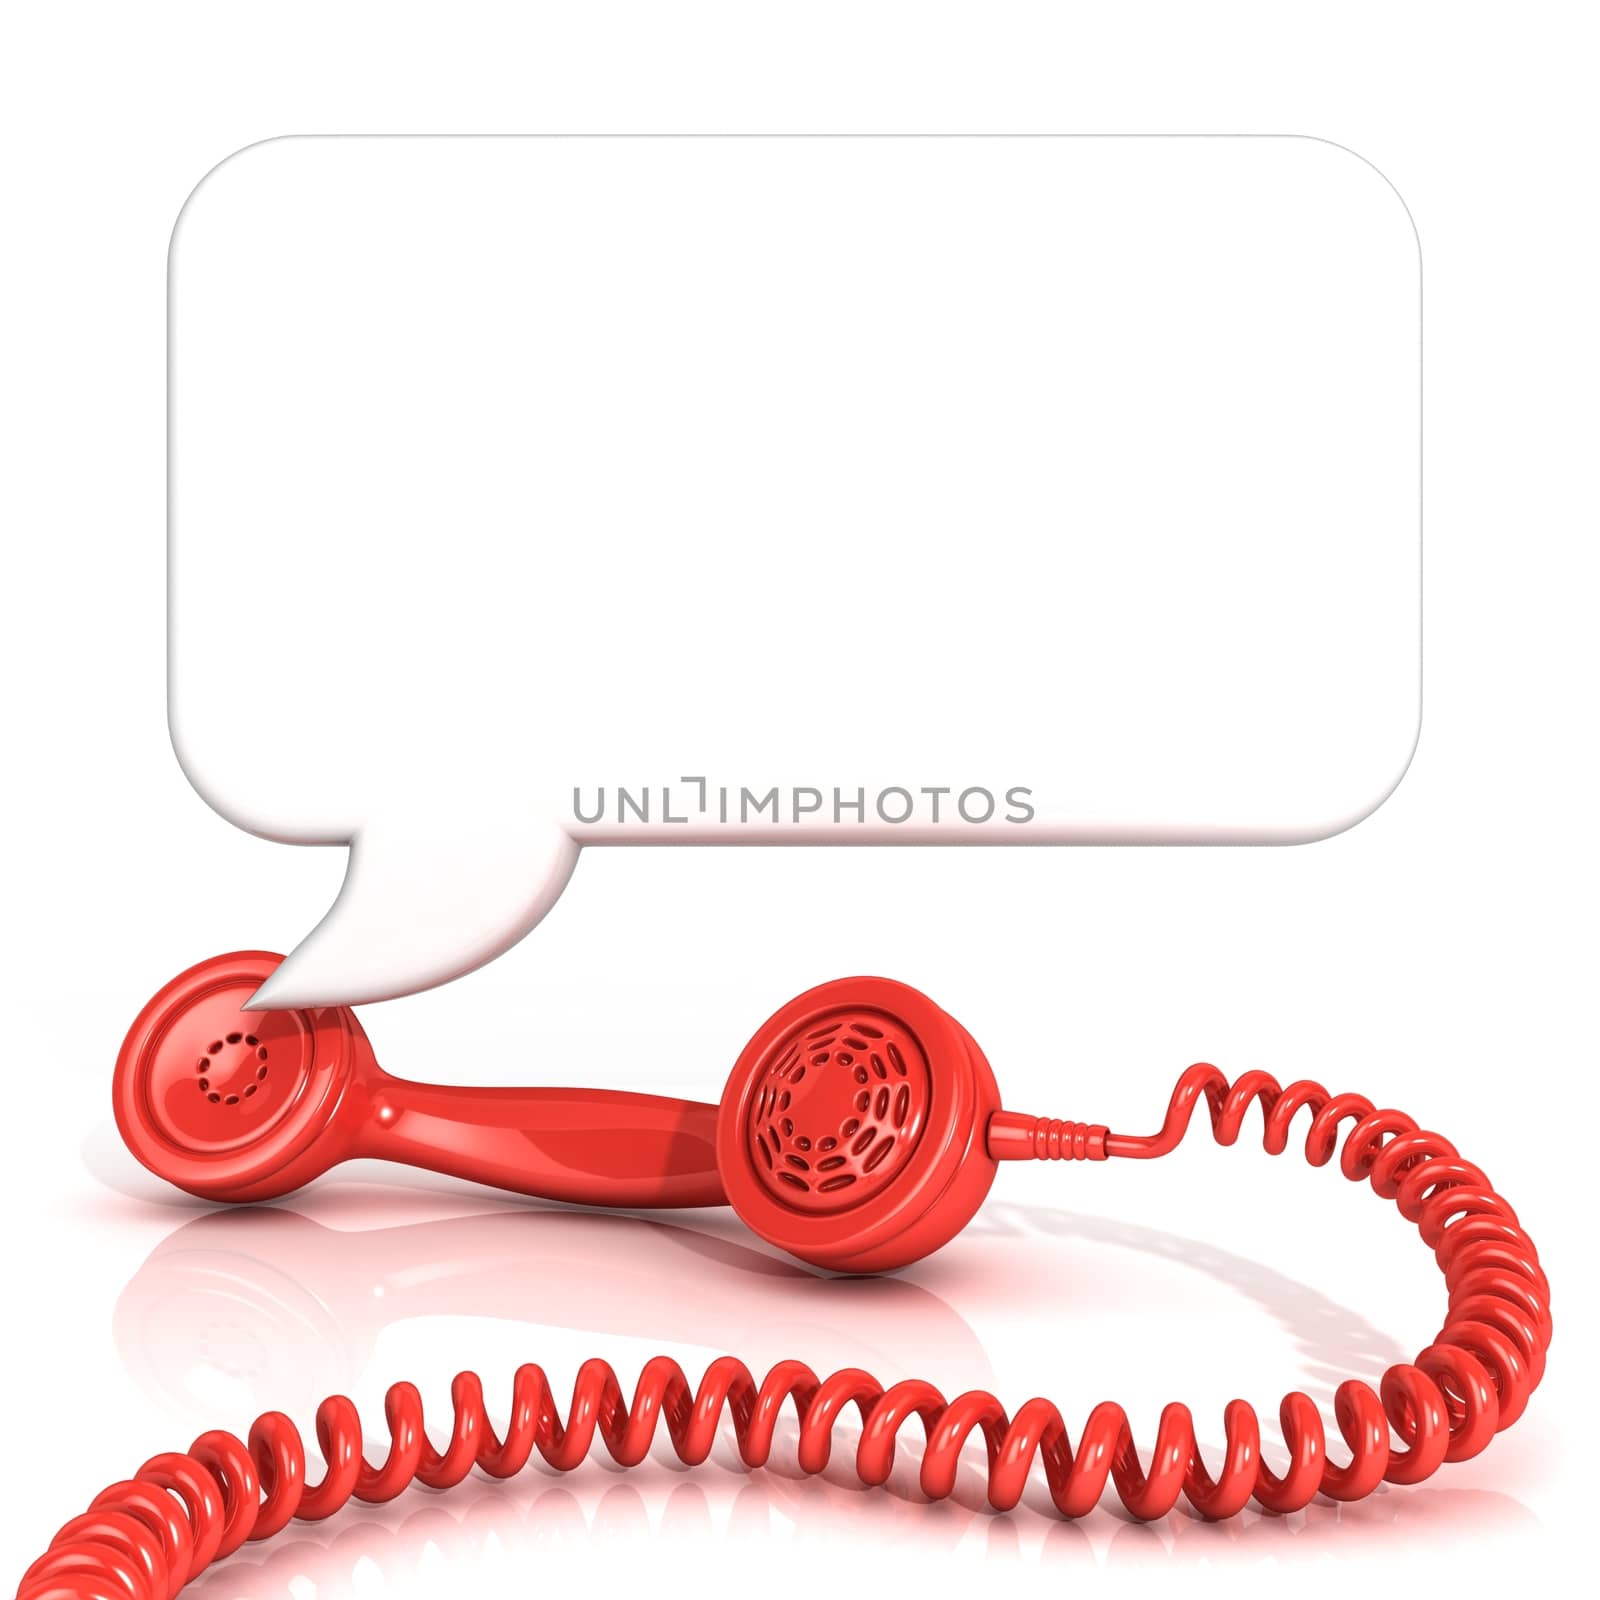 Red old fashion telephone handsets and speech bubble. Isolated on white background